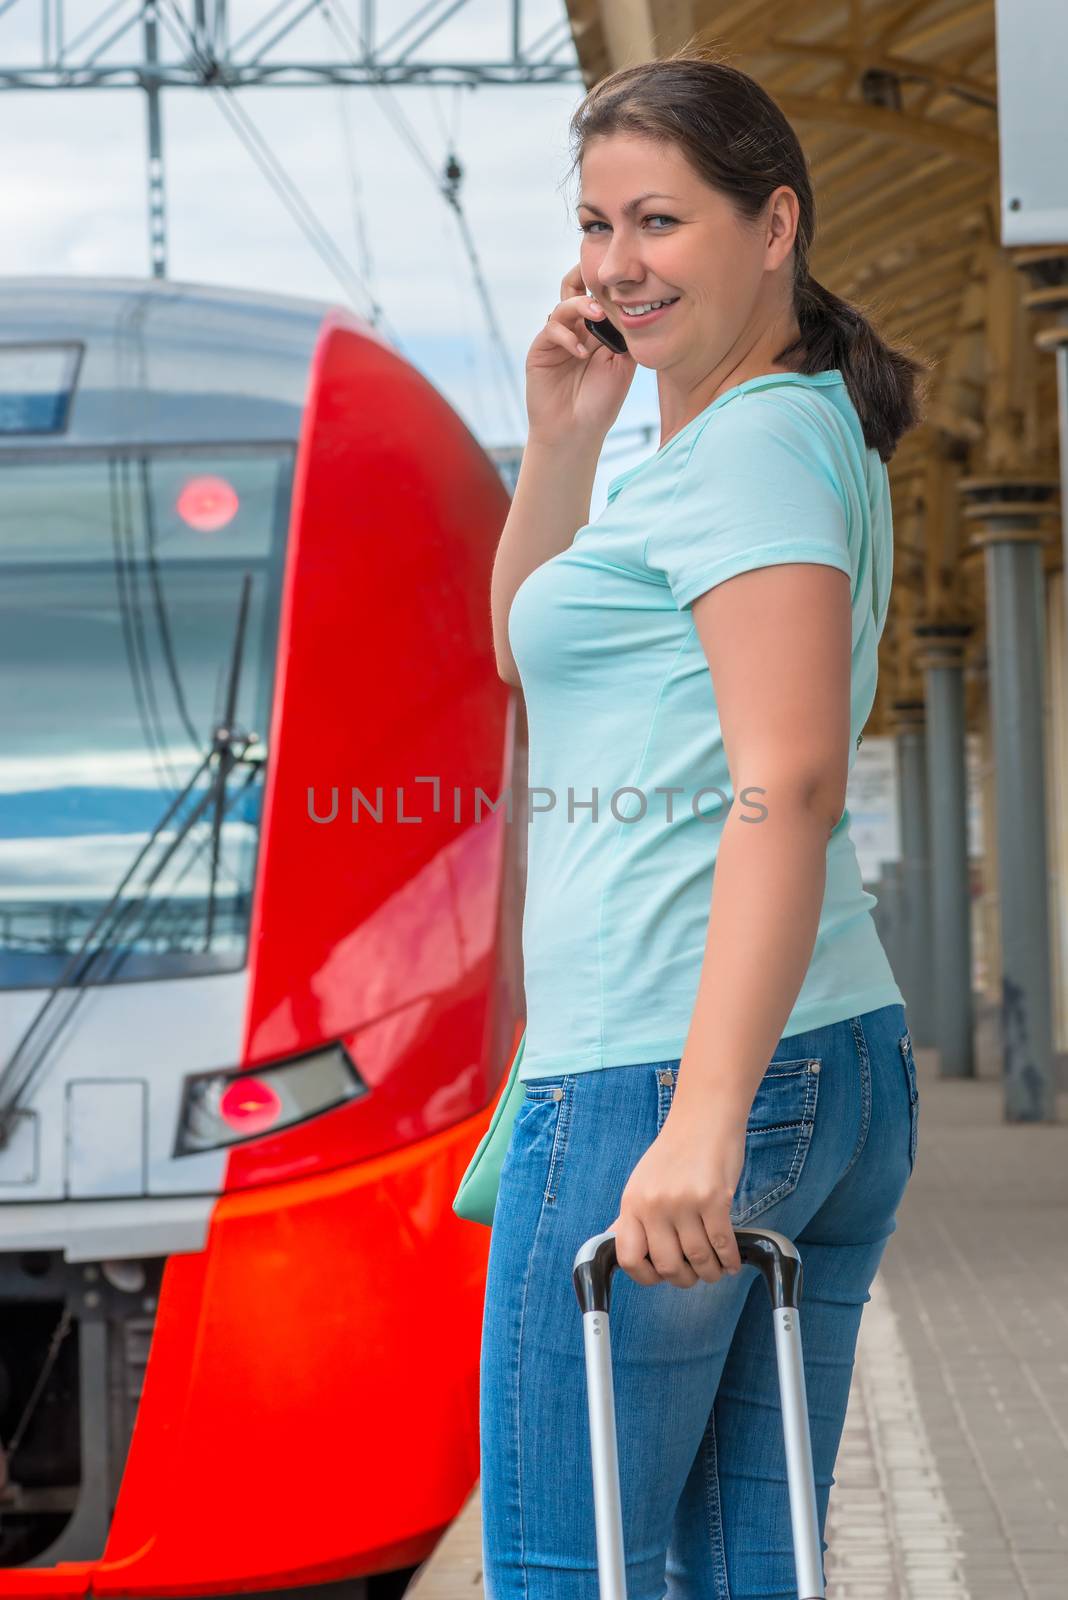 brunette woman embarks on a journey by train by kosmsos111